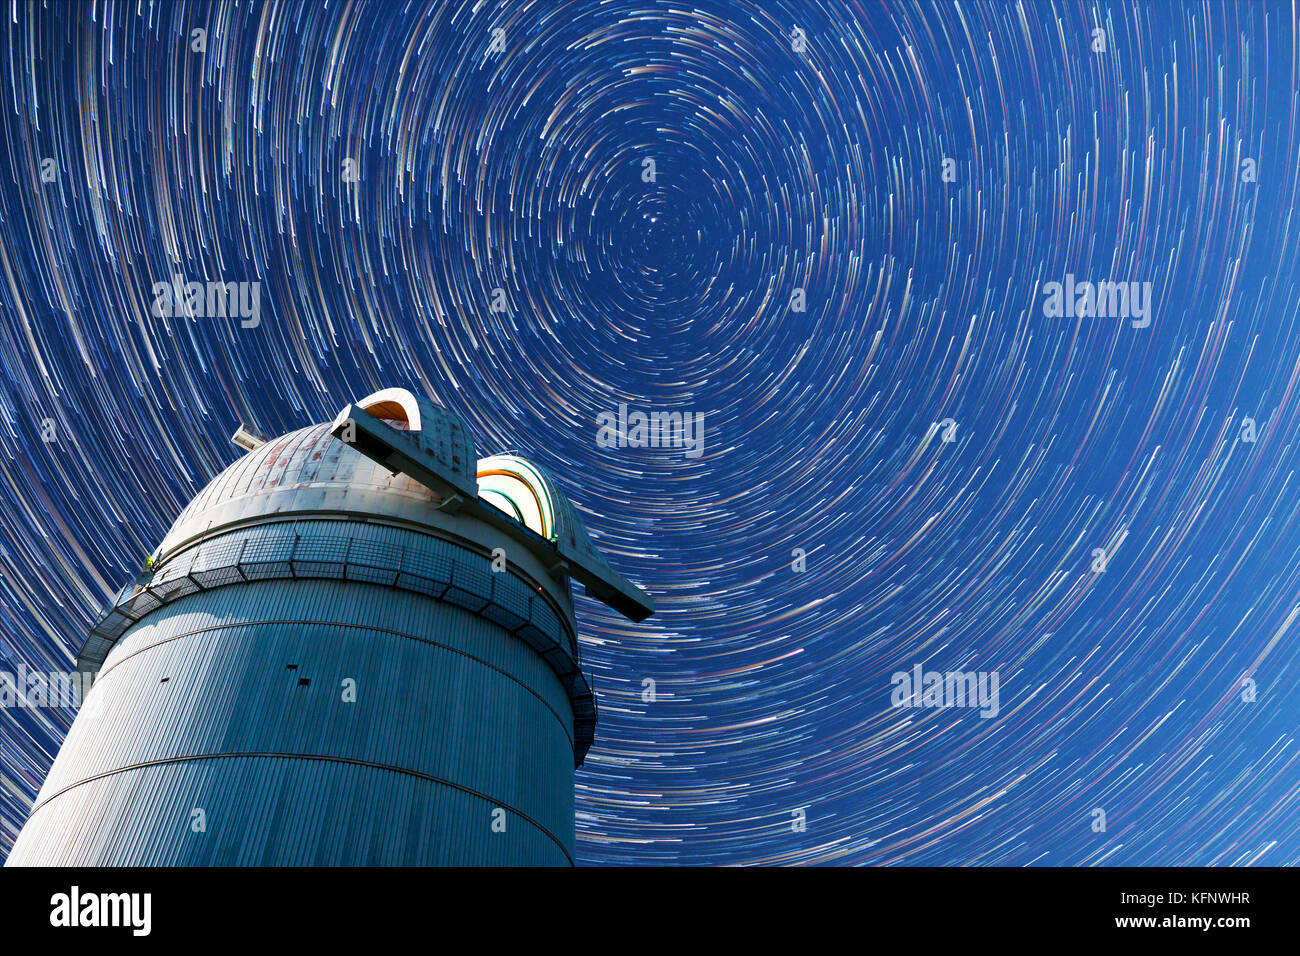 Astronomical observatory under the night sky stars. Blue sky with hundreds of stars of the Milky way. Timelapse in comet mode. Stock Photo